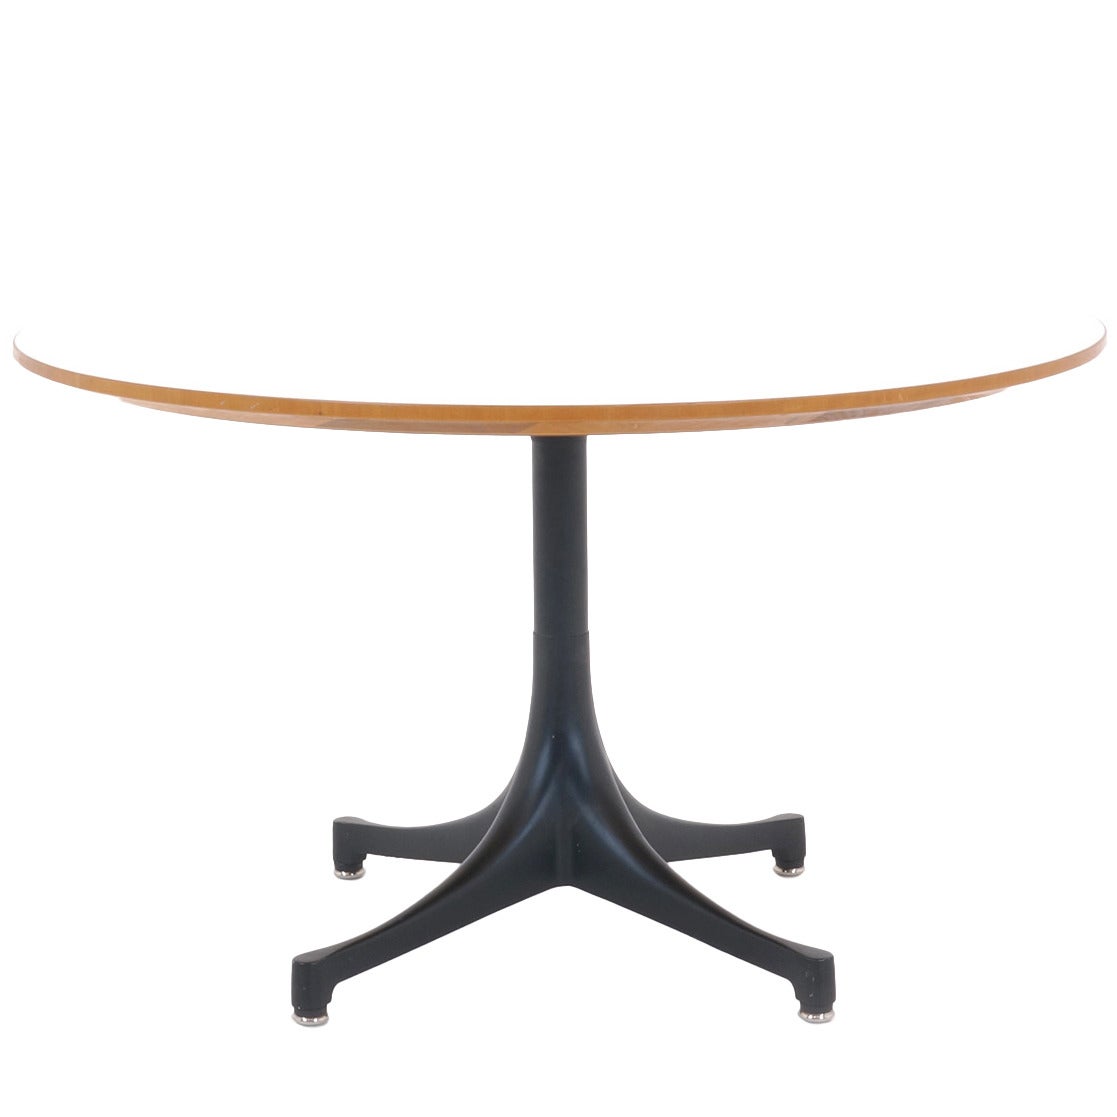 Early George Nelson for Herman Miller Pedestal Table